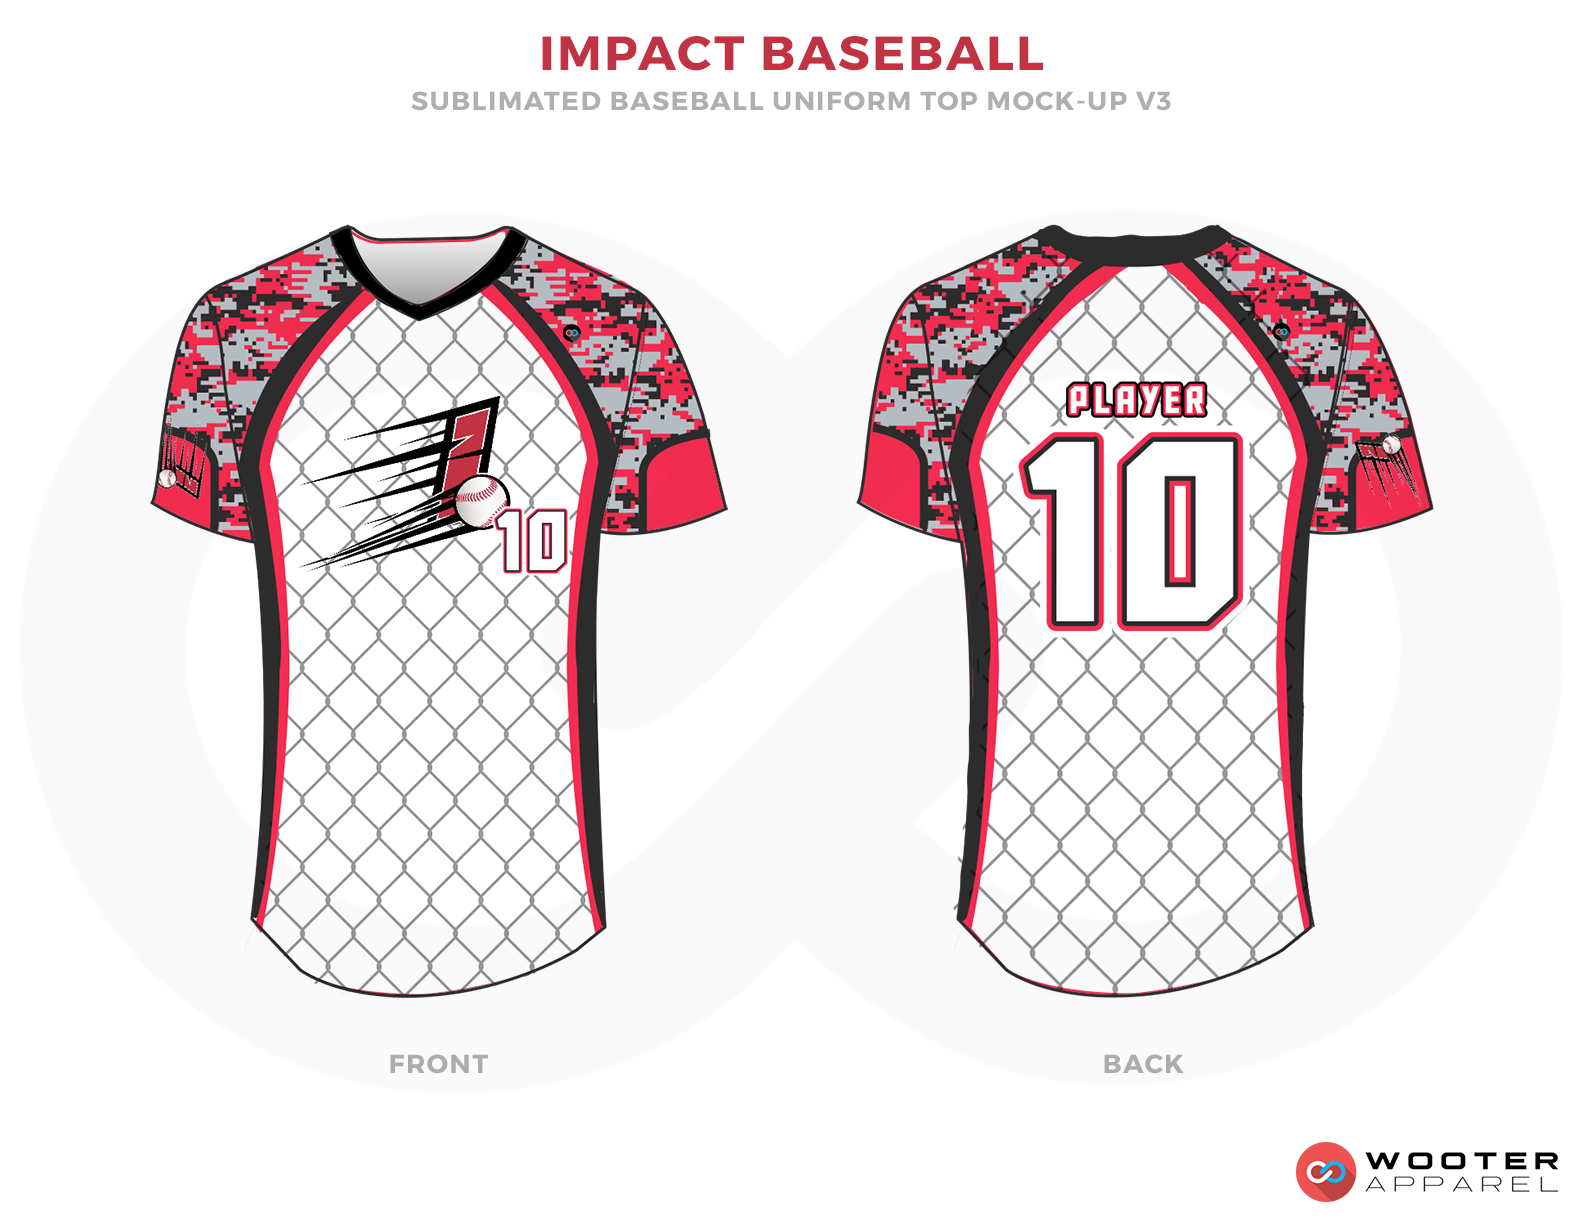 red white and black baseball jersey